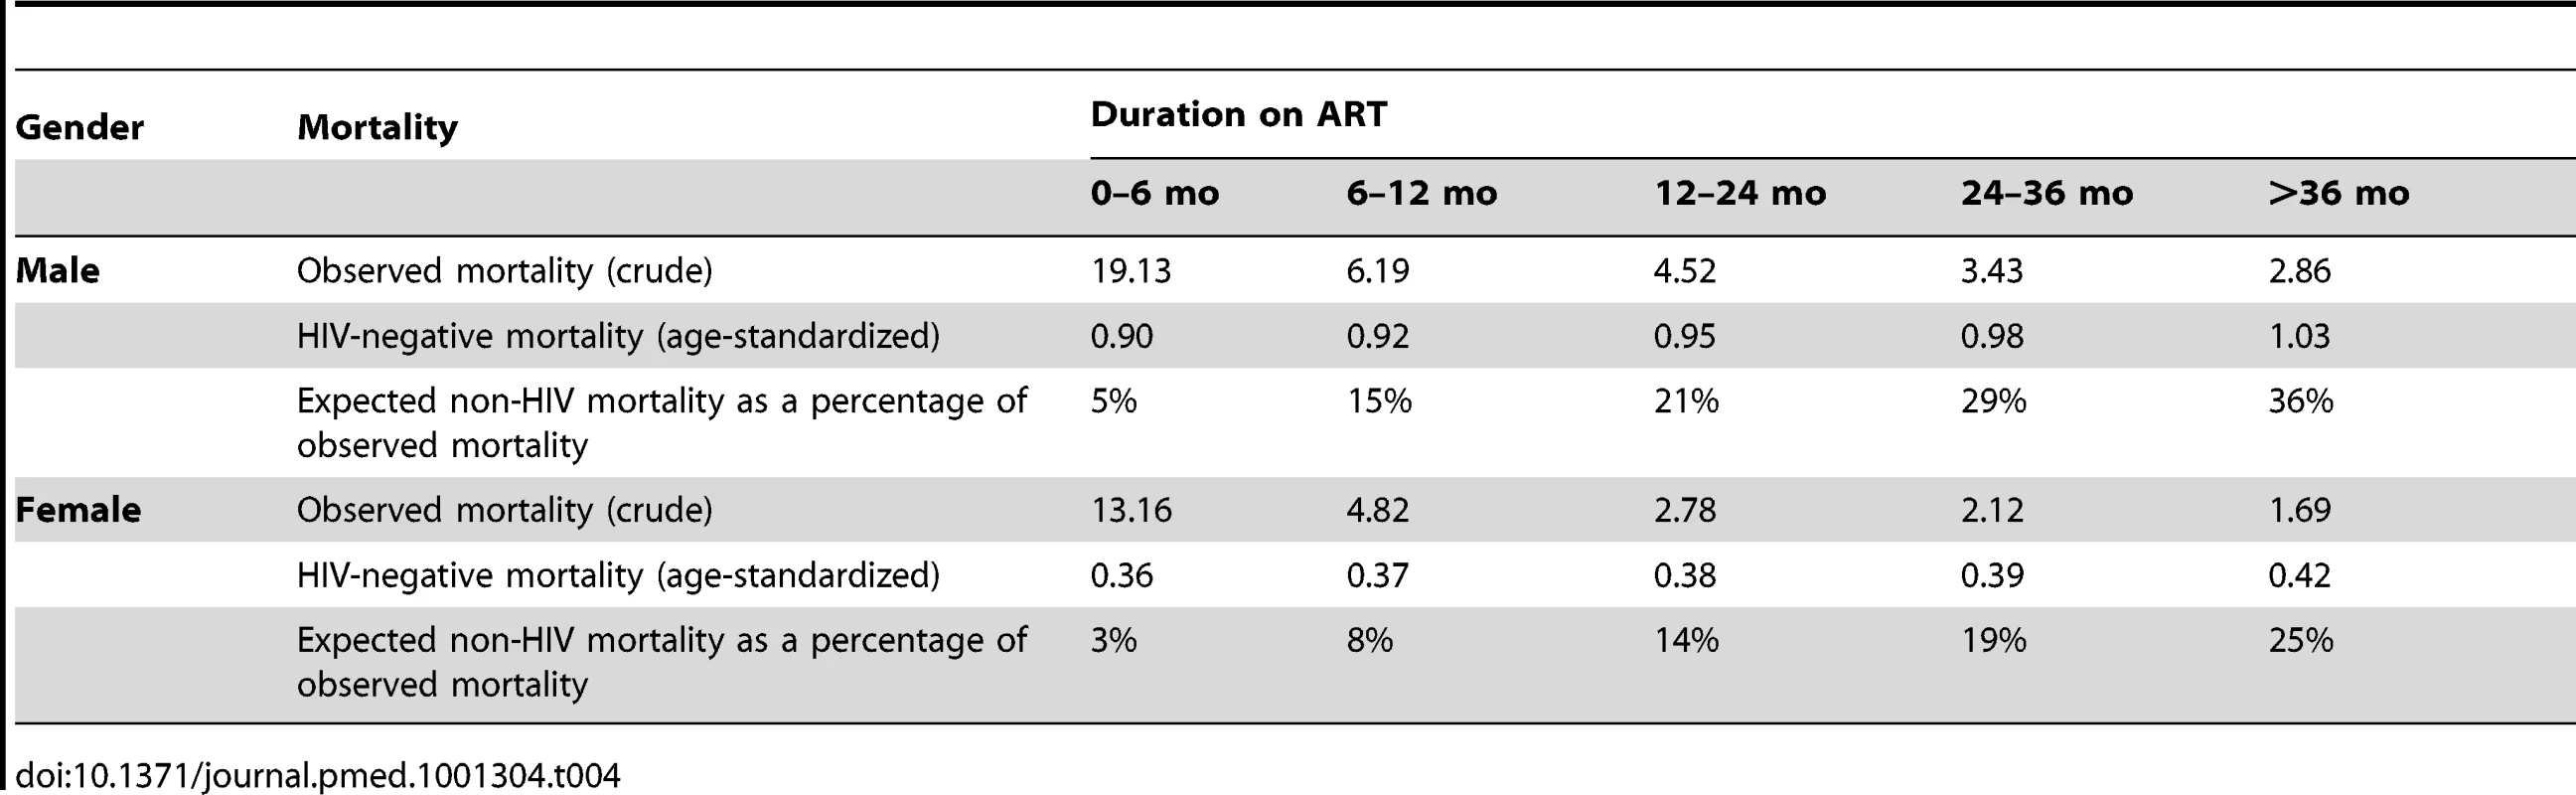 Observed crude mortality&lt;sup&gt;a&lt;/sup&gt;, age-standardised HIV-negative mortality&lt;sup&gt;a&lt;/sup&gt;, and expected non-HIV mortality as a percentage of observed mortality among men and women, by duration on ART.